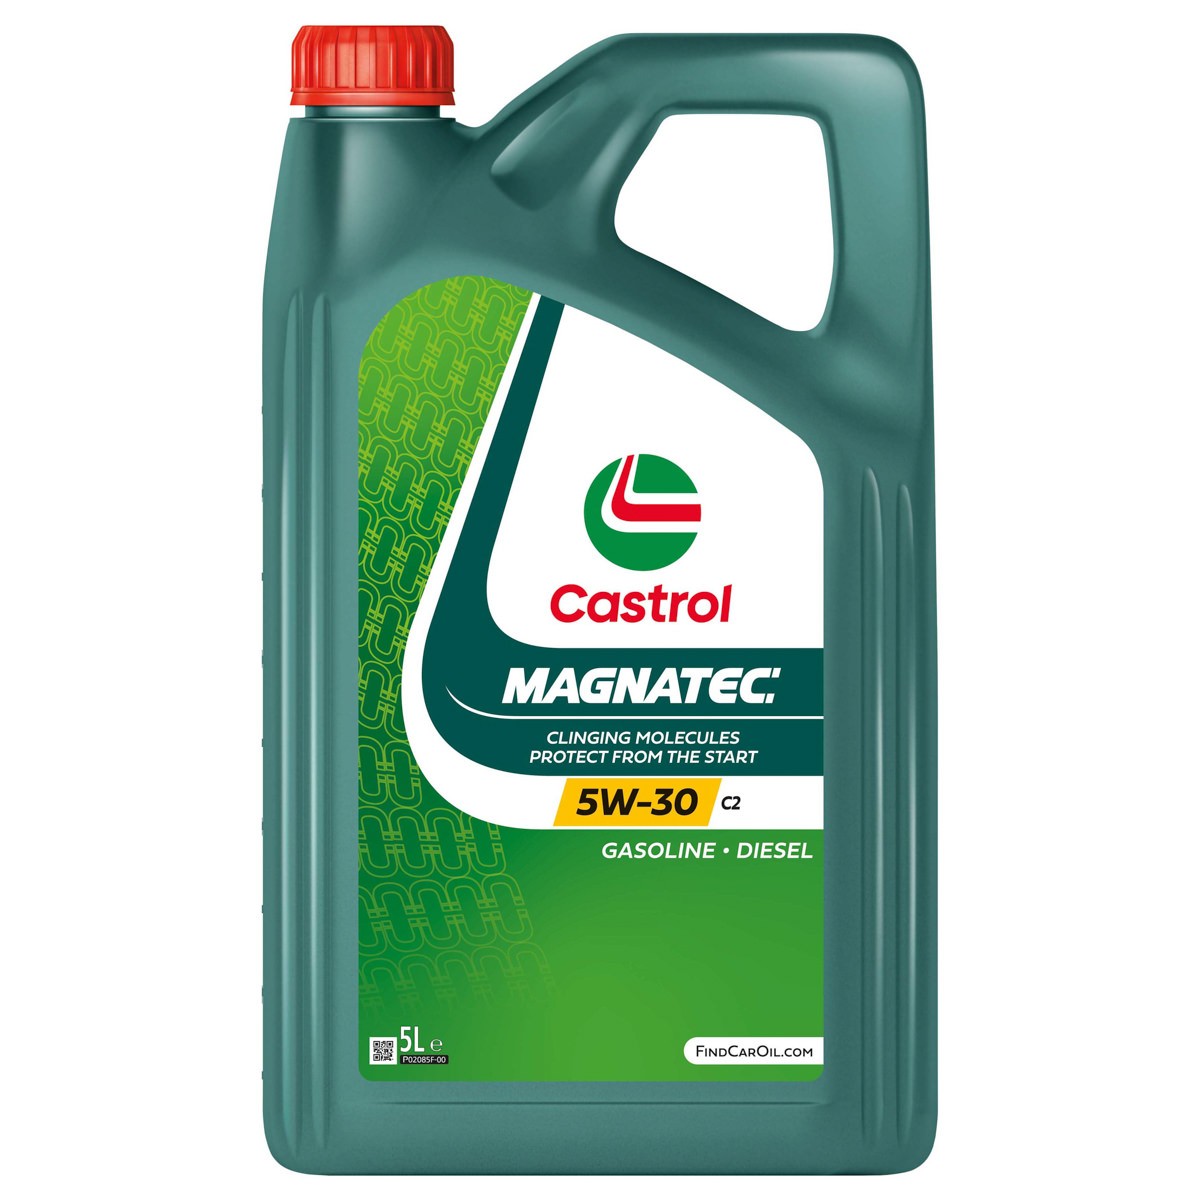 CASTROL Huile moteur OPEL,FORD,RENAULT 15F6C4 Huile